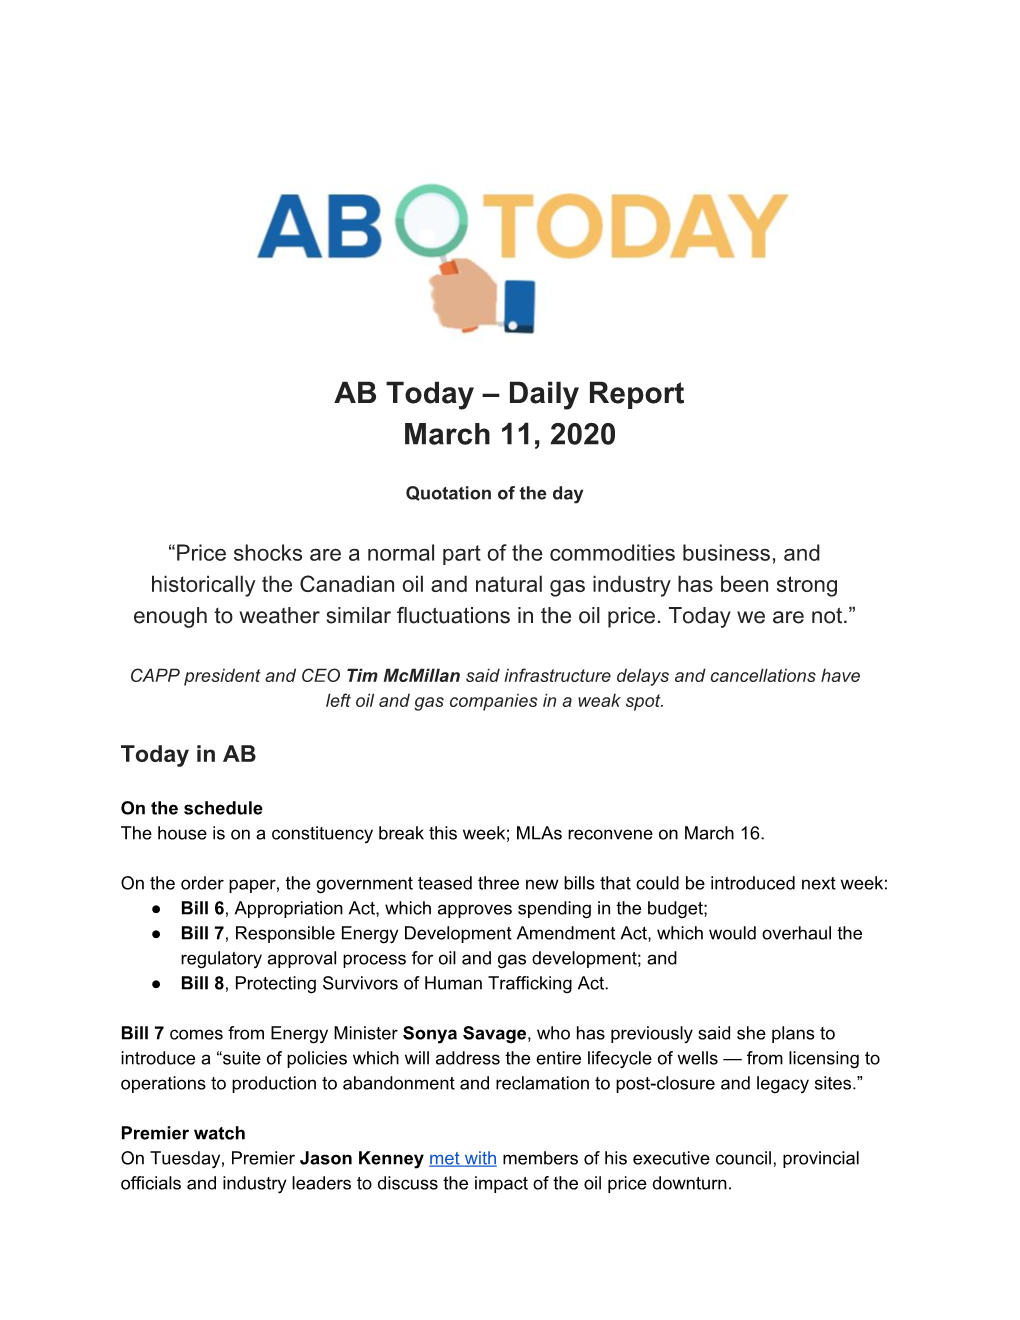 AB Today – Daily Report March 11, 2020